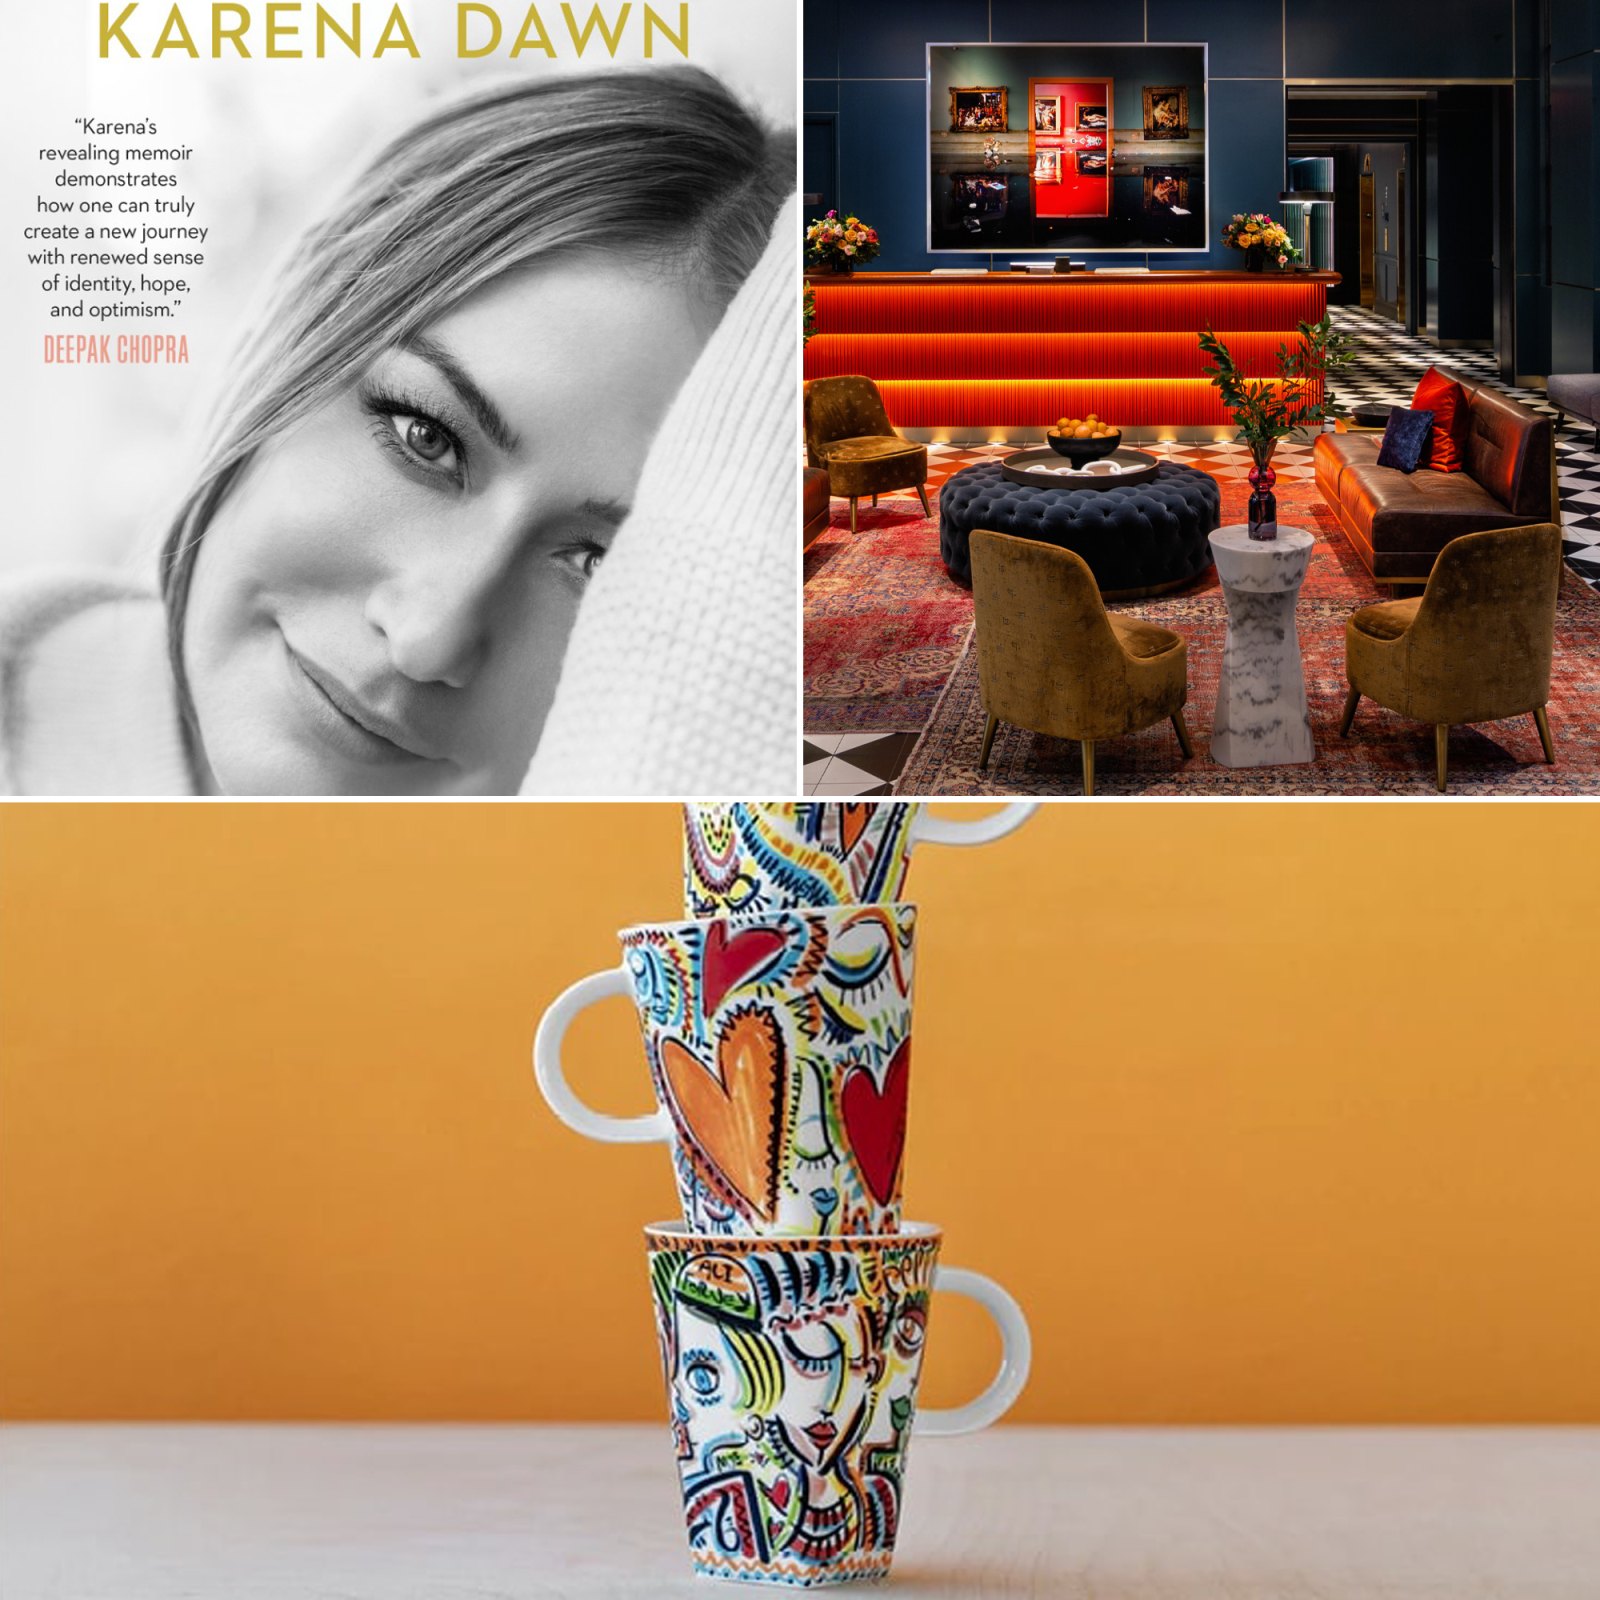 Buzzzz-o-Meter: Karena Dawn's Moving Memoir, A 'Dream' Hotel, and More of What Hollywood Is Buzzing About This Week